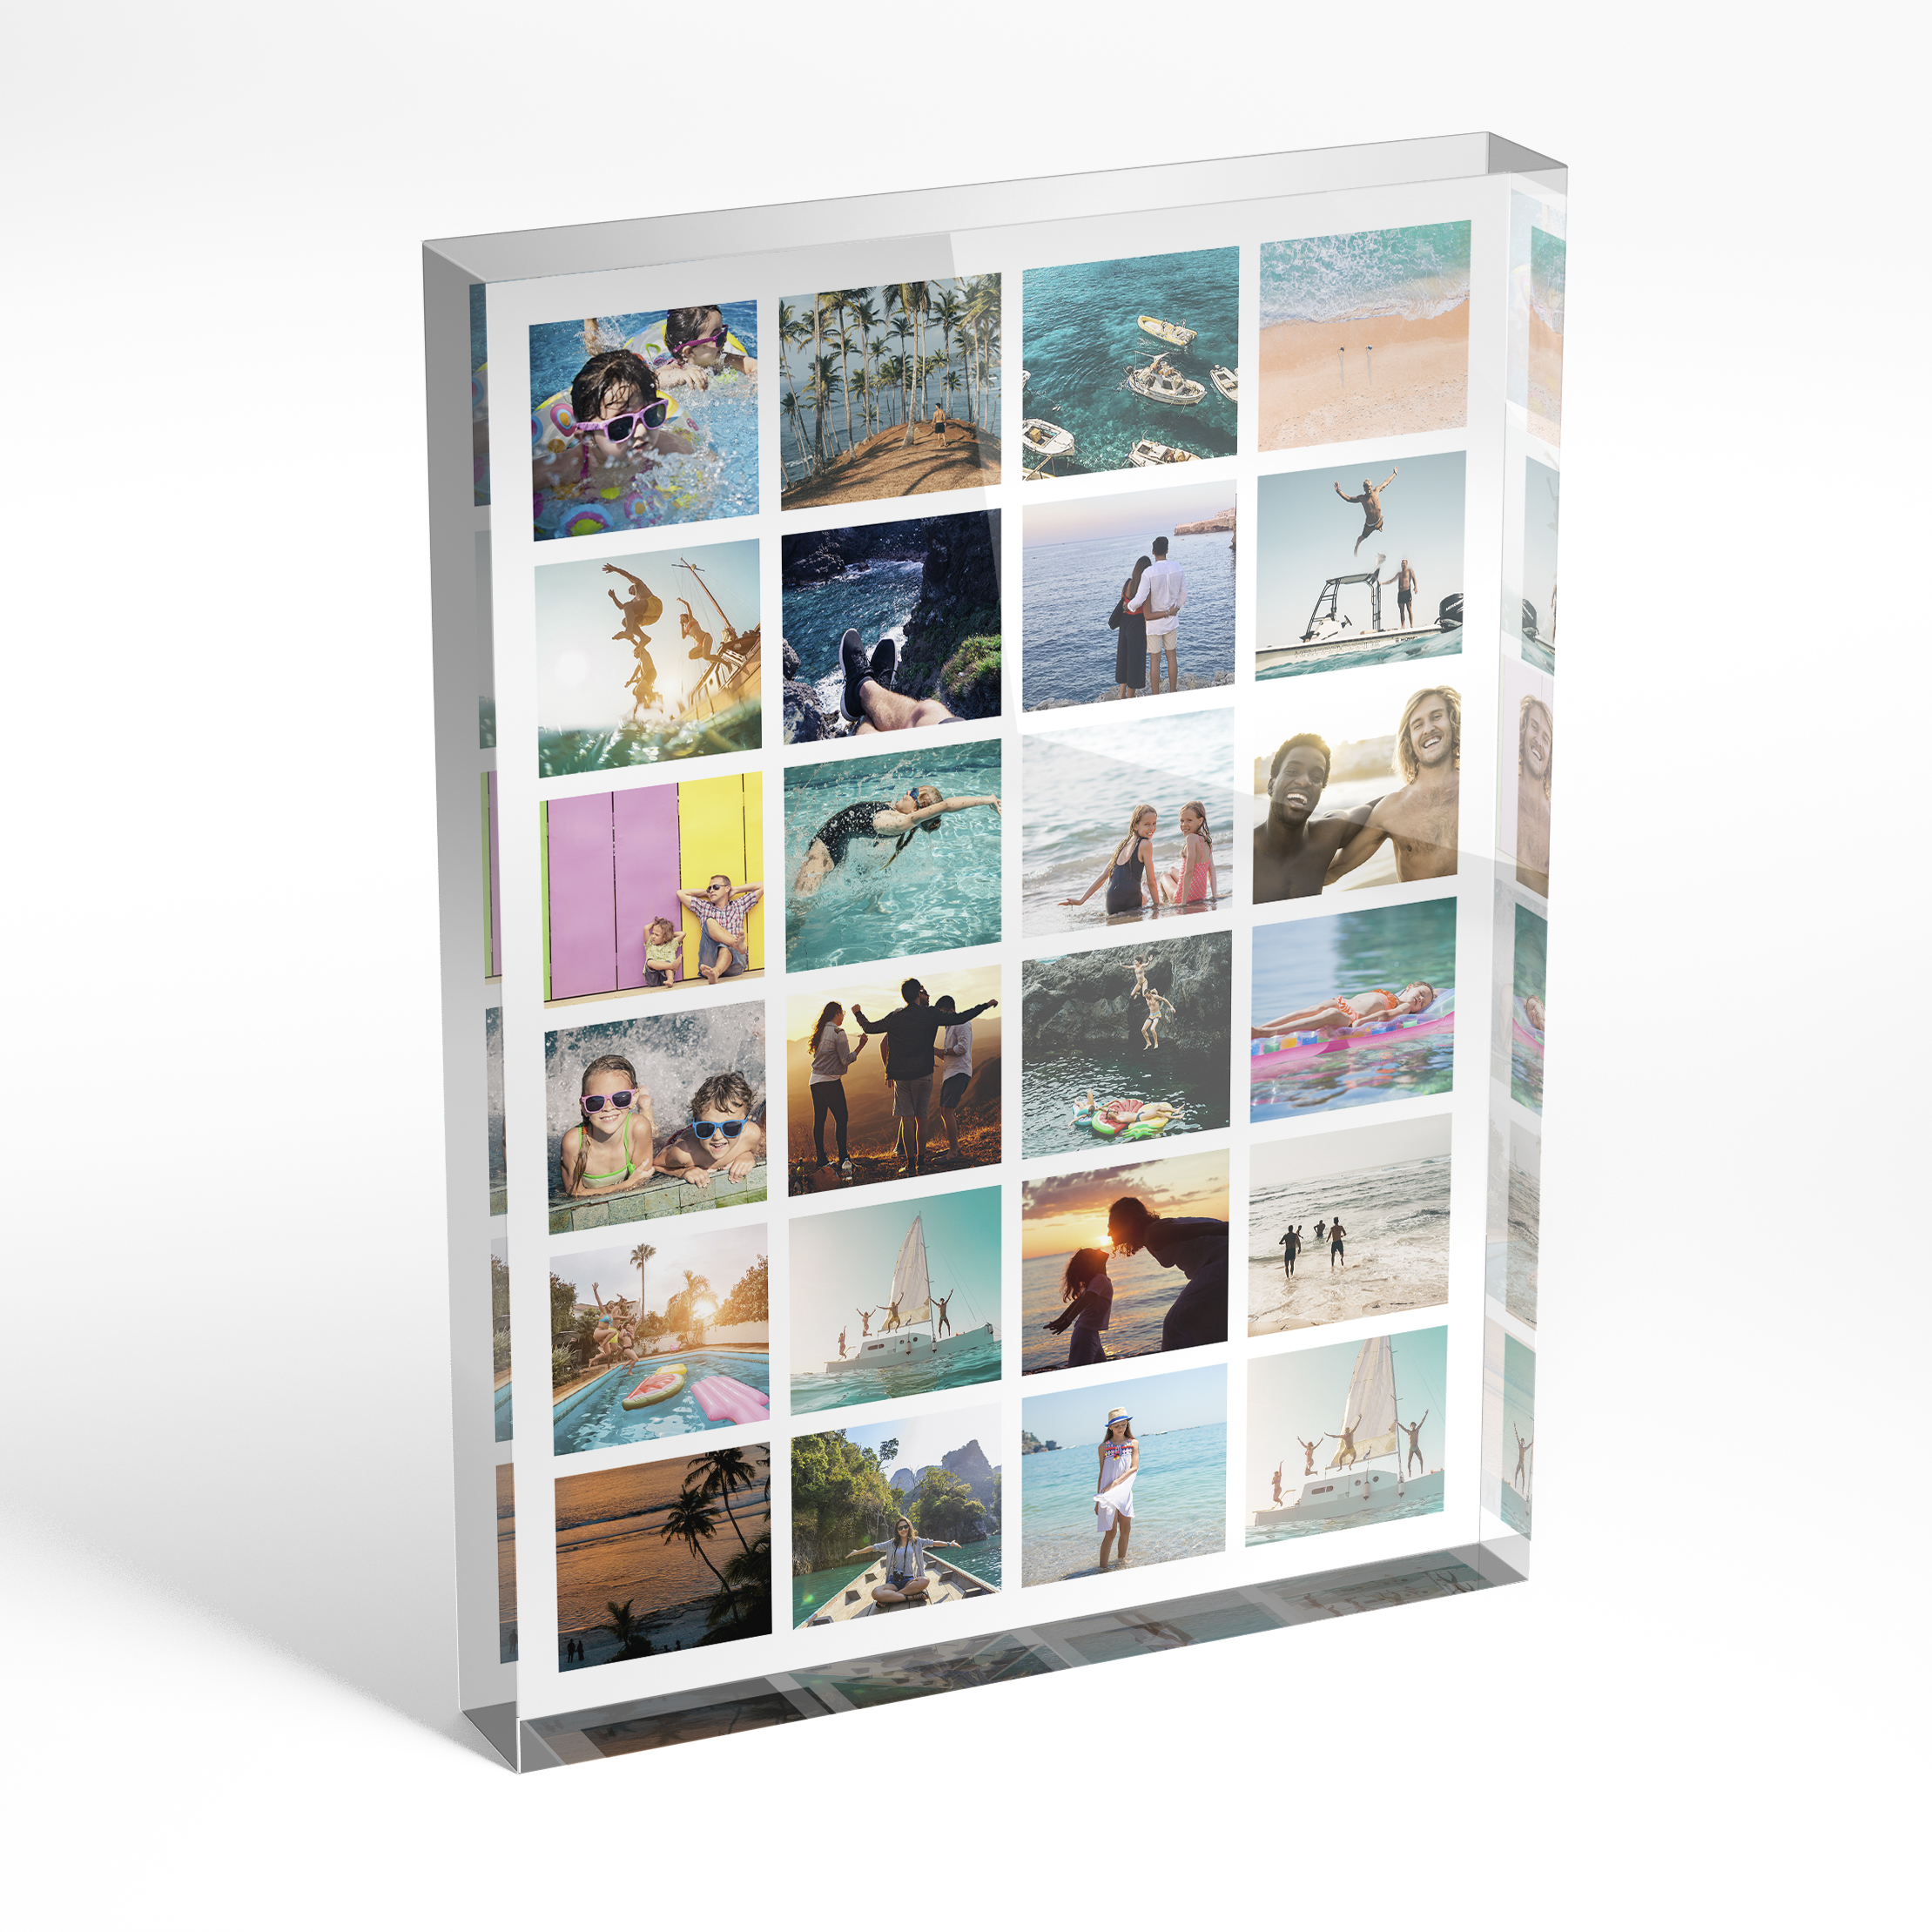 A front side view of a portrait layout Acrylic Glass Photo Block with space for 10+ photos. Thiis design is named 'Holiday Mosaic'. 